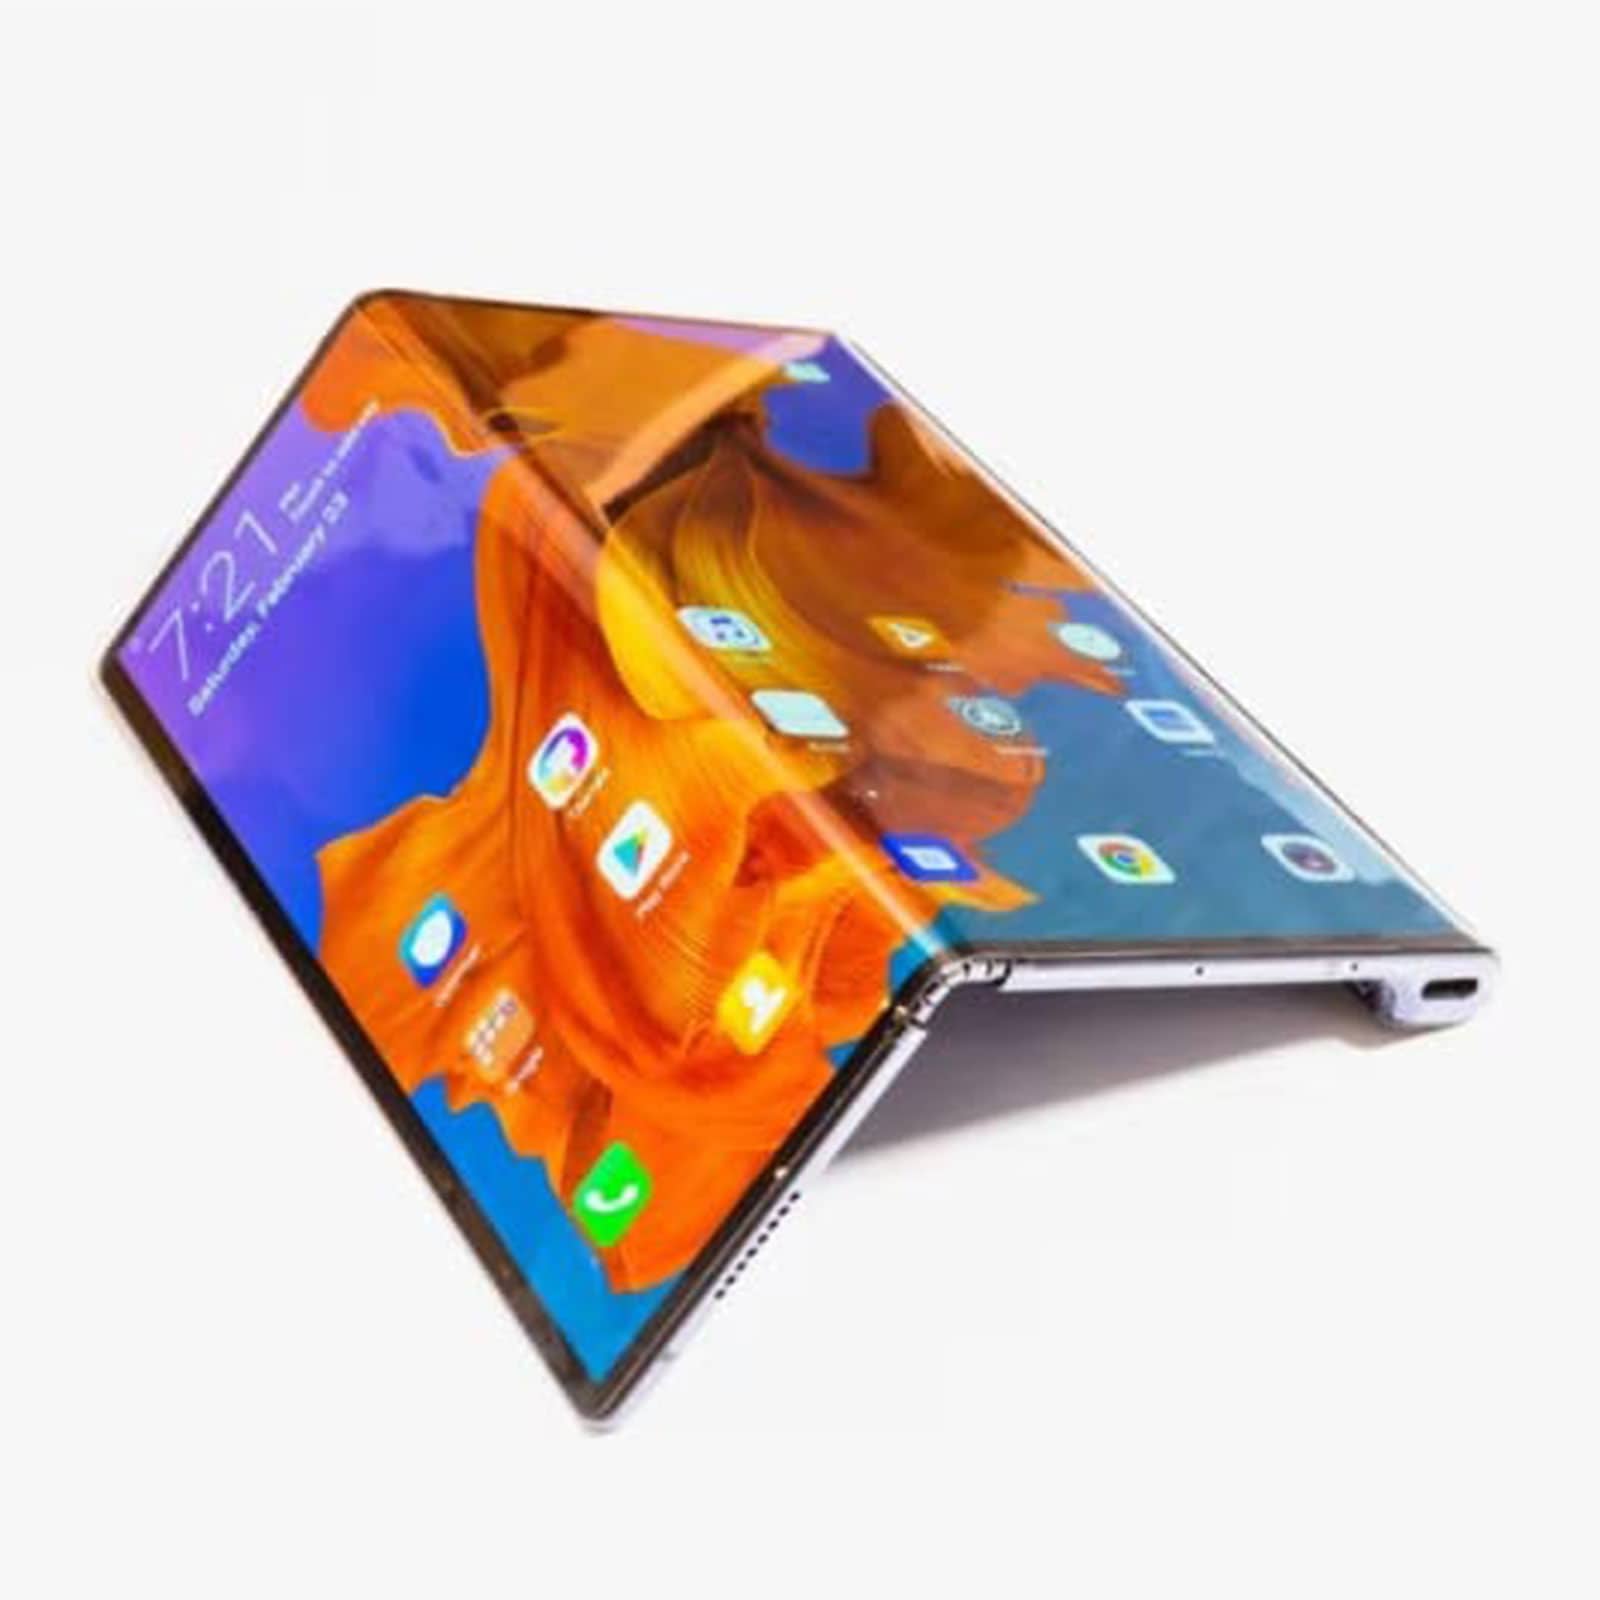 Huawei's folding phone takes the foldable fight up a notch – Pickr